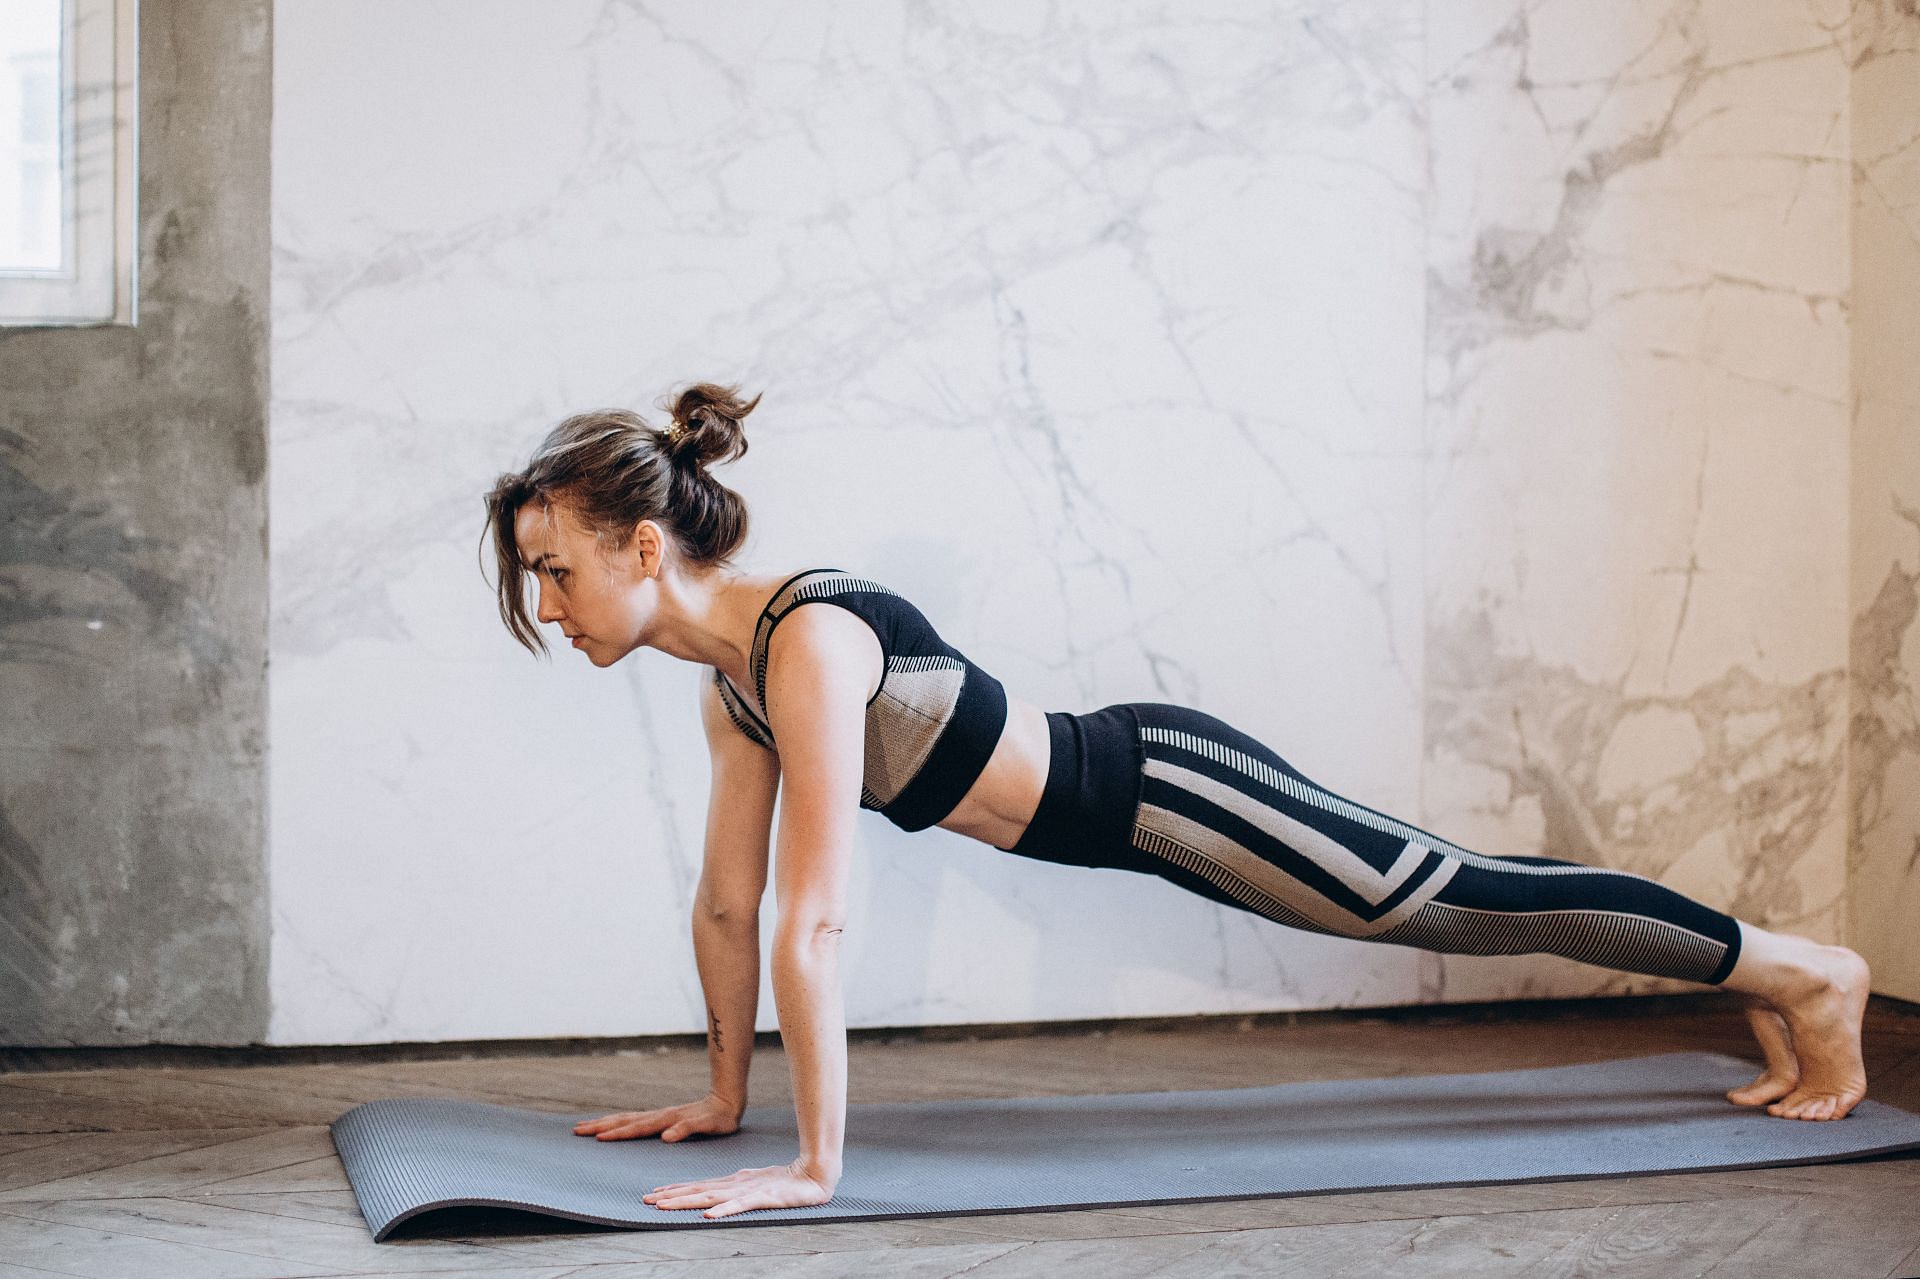 Micro workouts last under ten minutes and are ideal for people with busy schedules. (Image via Pexels/ Elina Fairytale)